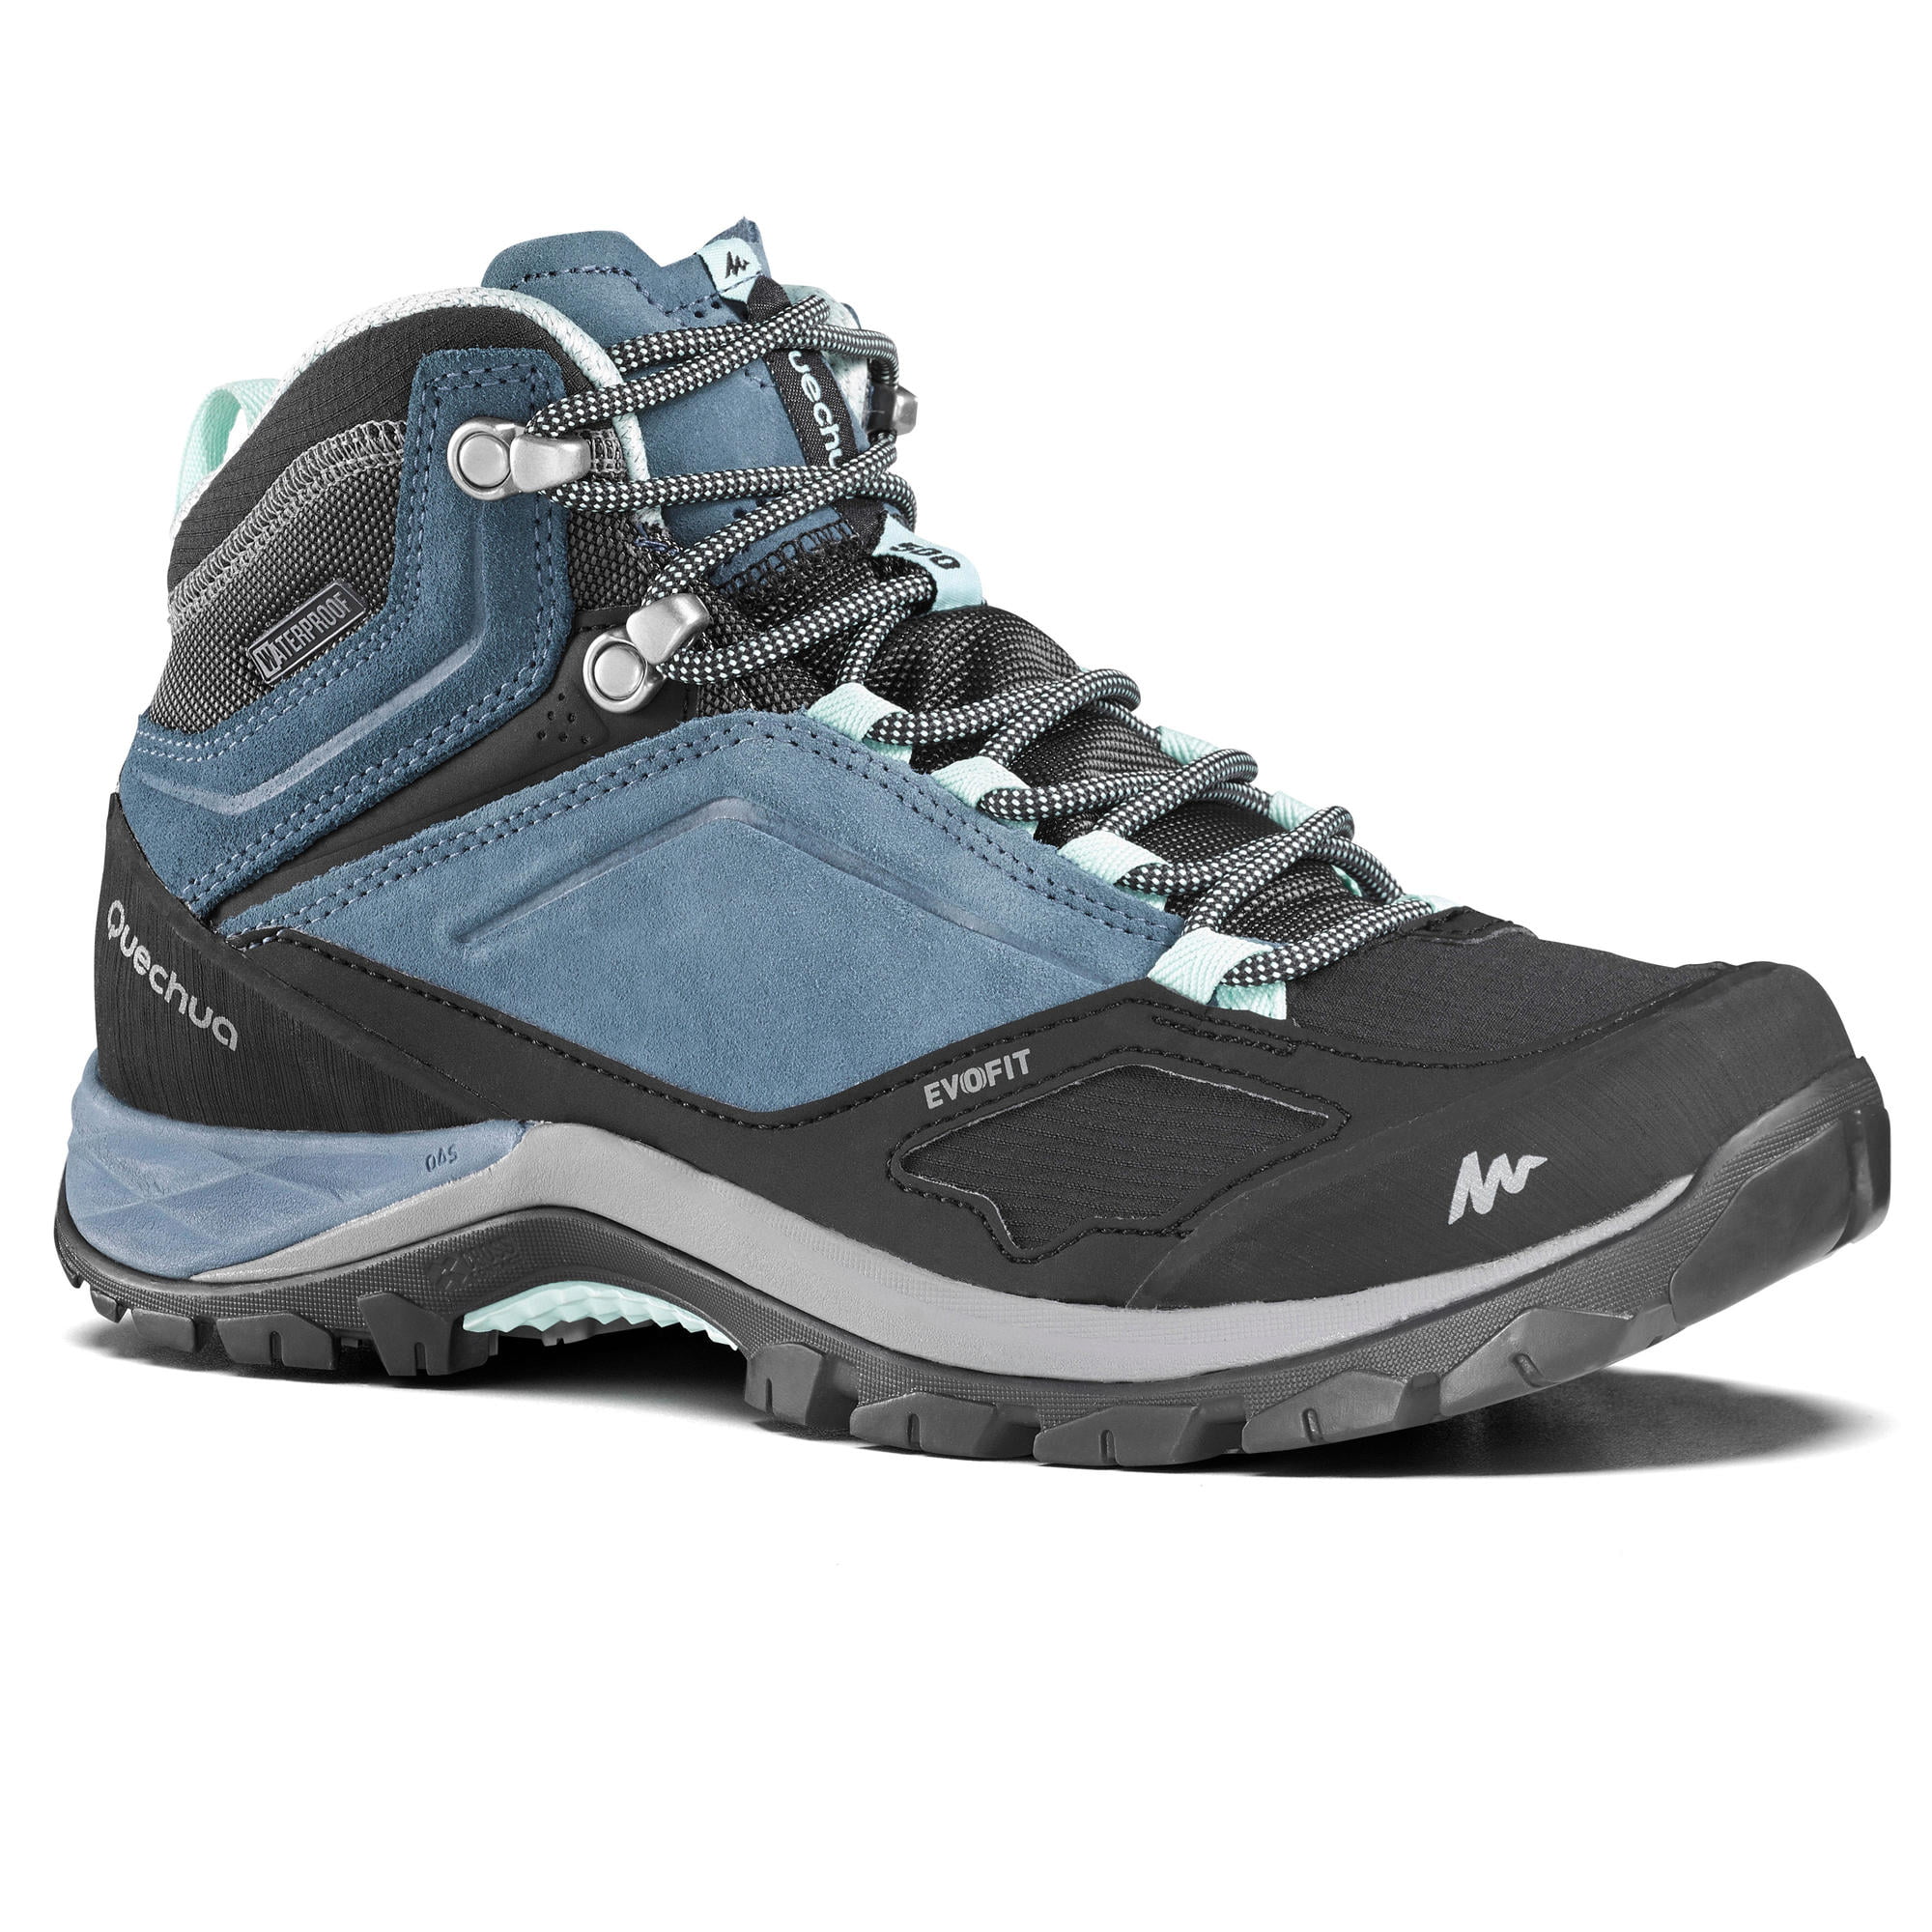 MH500 Mid Waterproof Hiking Shoes 